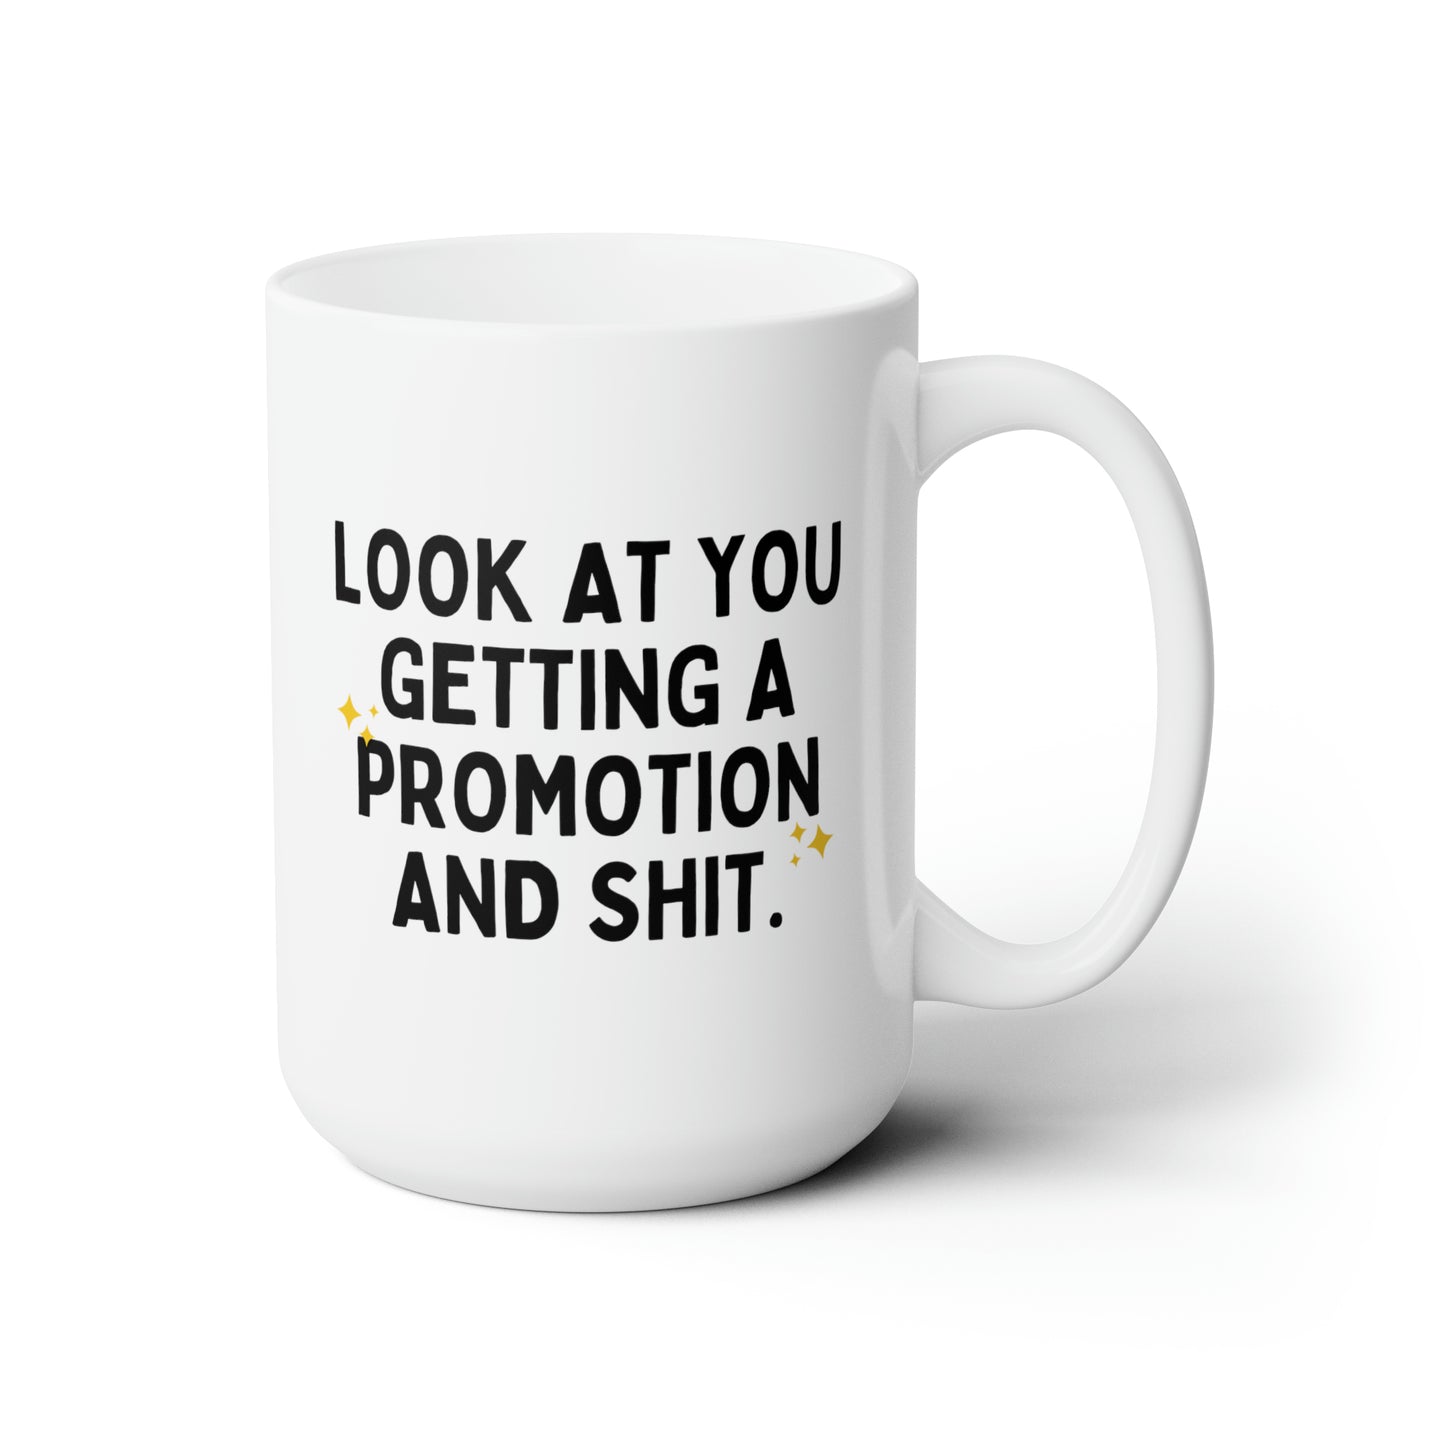 Look At You Getting A Promotion And Shit 15oz white funny large coffee mug gift for women men promoted coworker colleague congratulations waveywares wavey wares wavywares wavy wares